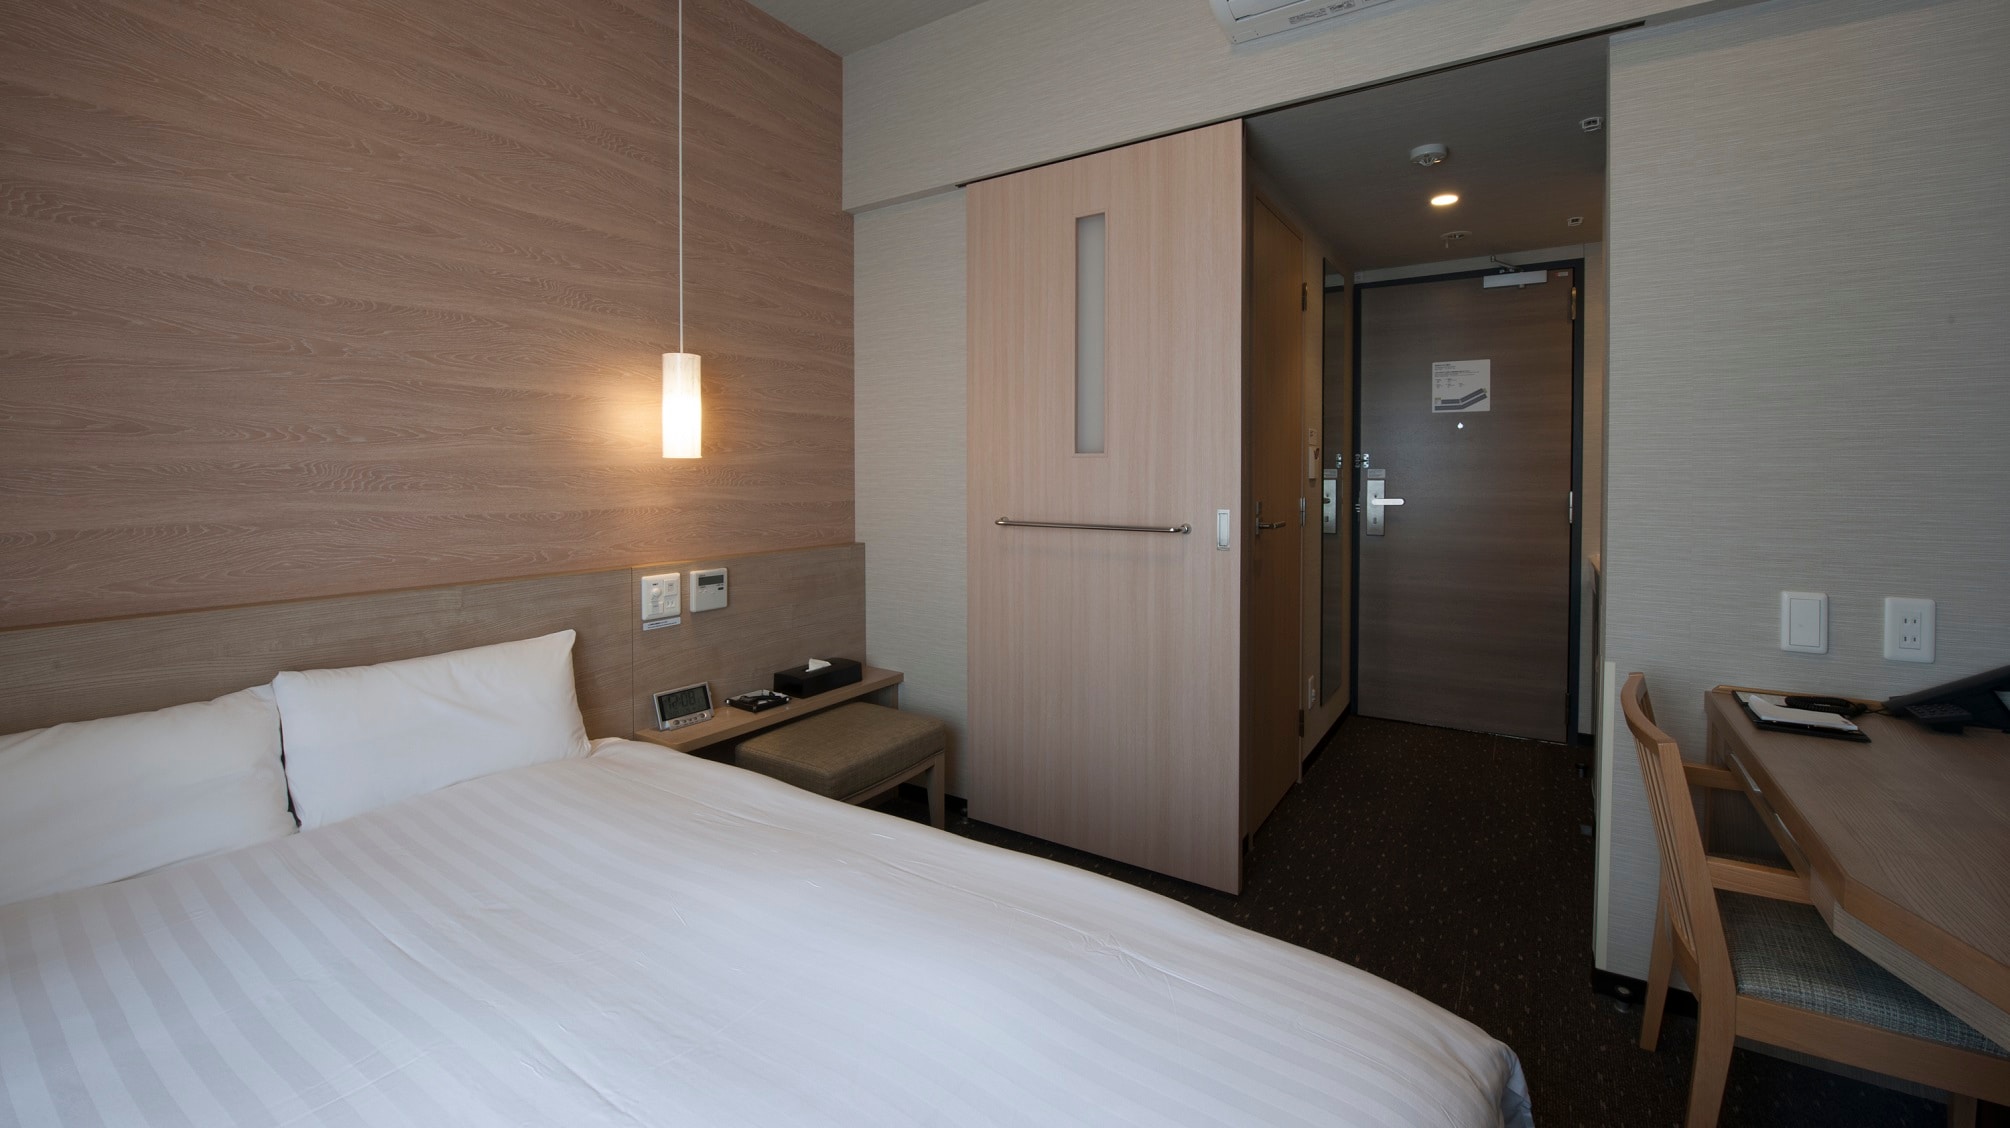 ◆ Double room 13.8 ~ 14.8㎡ ・ Bed size 140cm & times; 195cm & times; 1 bed ・ Simmons bed